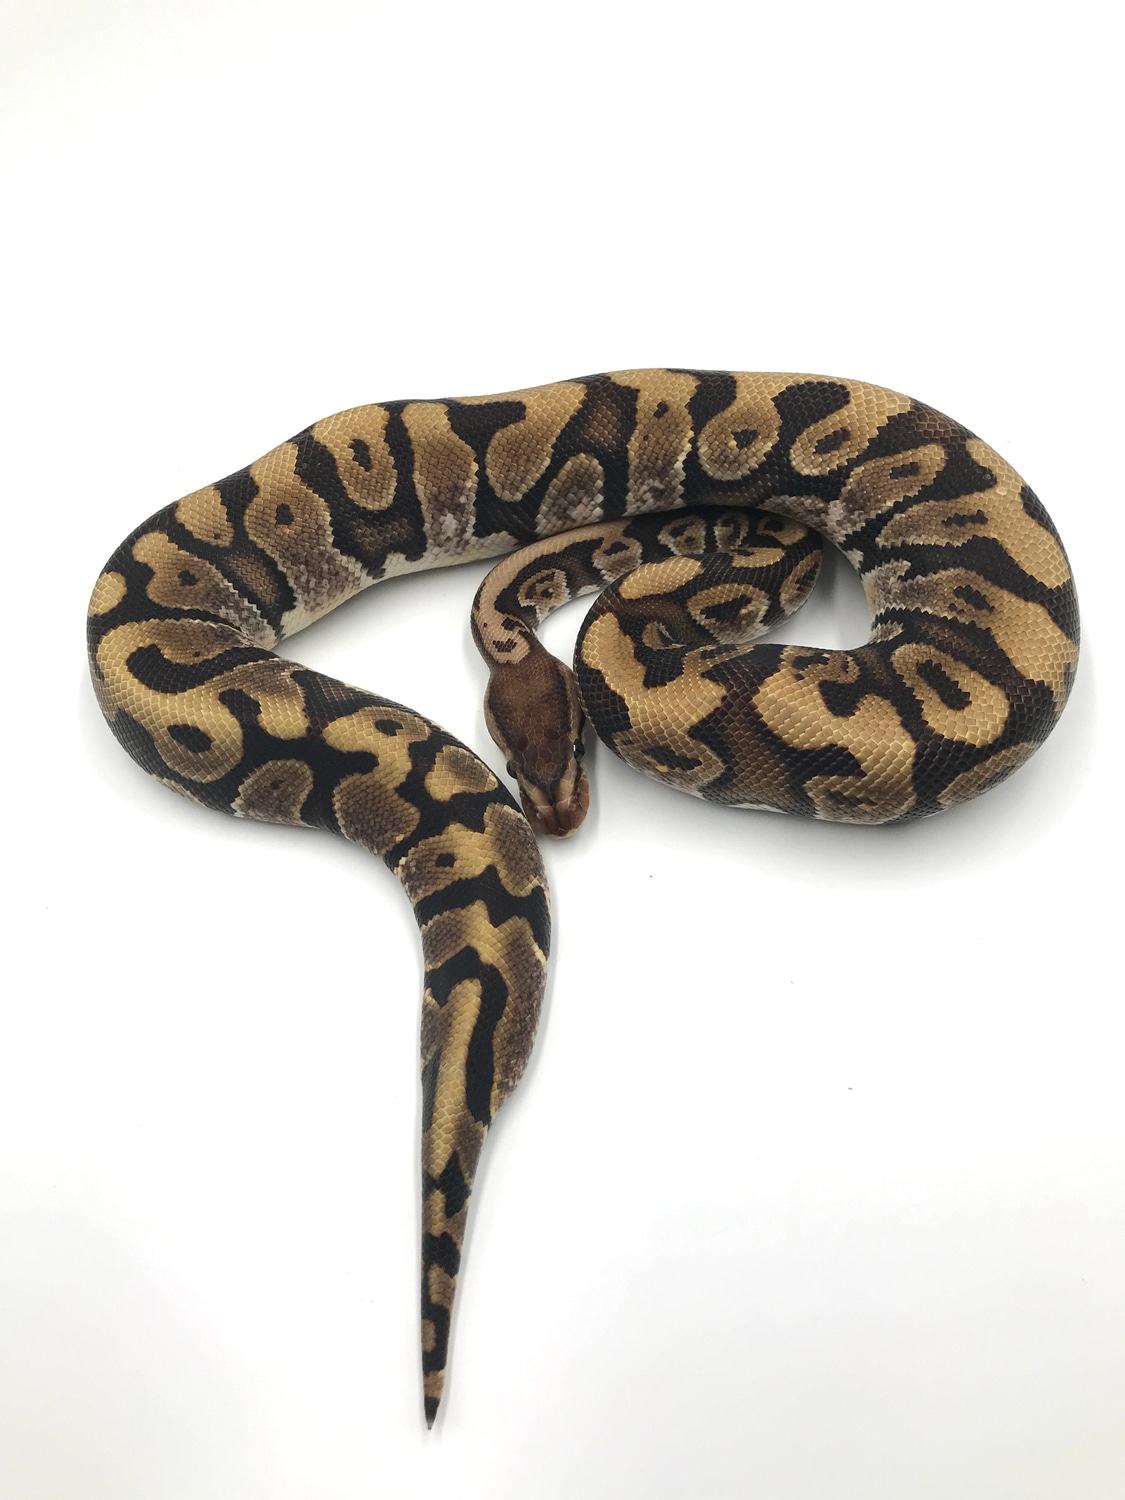 Hidden Gene Woma Ball Python by Wreck room snakes1